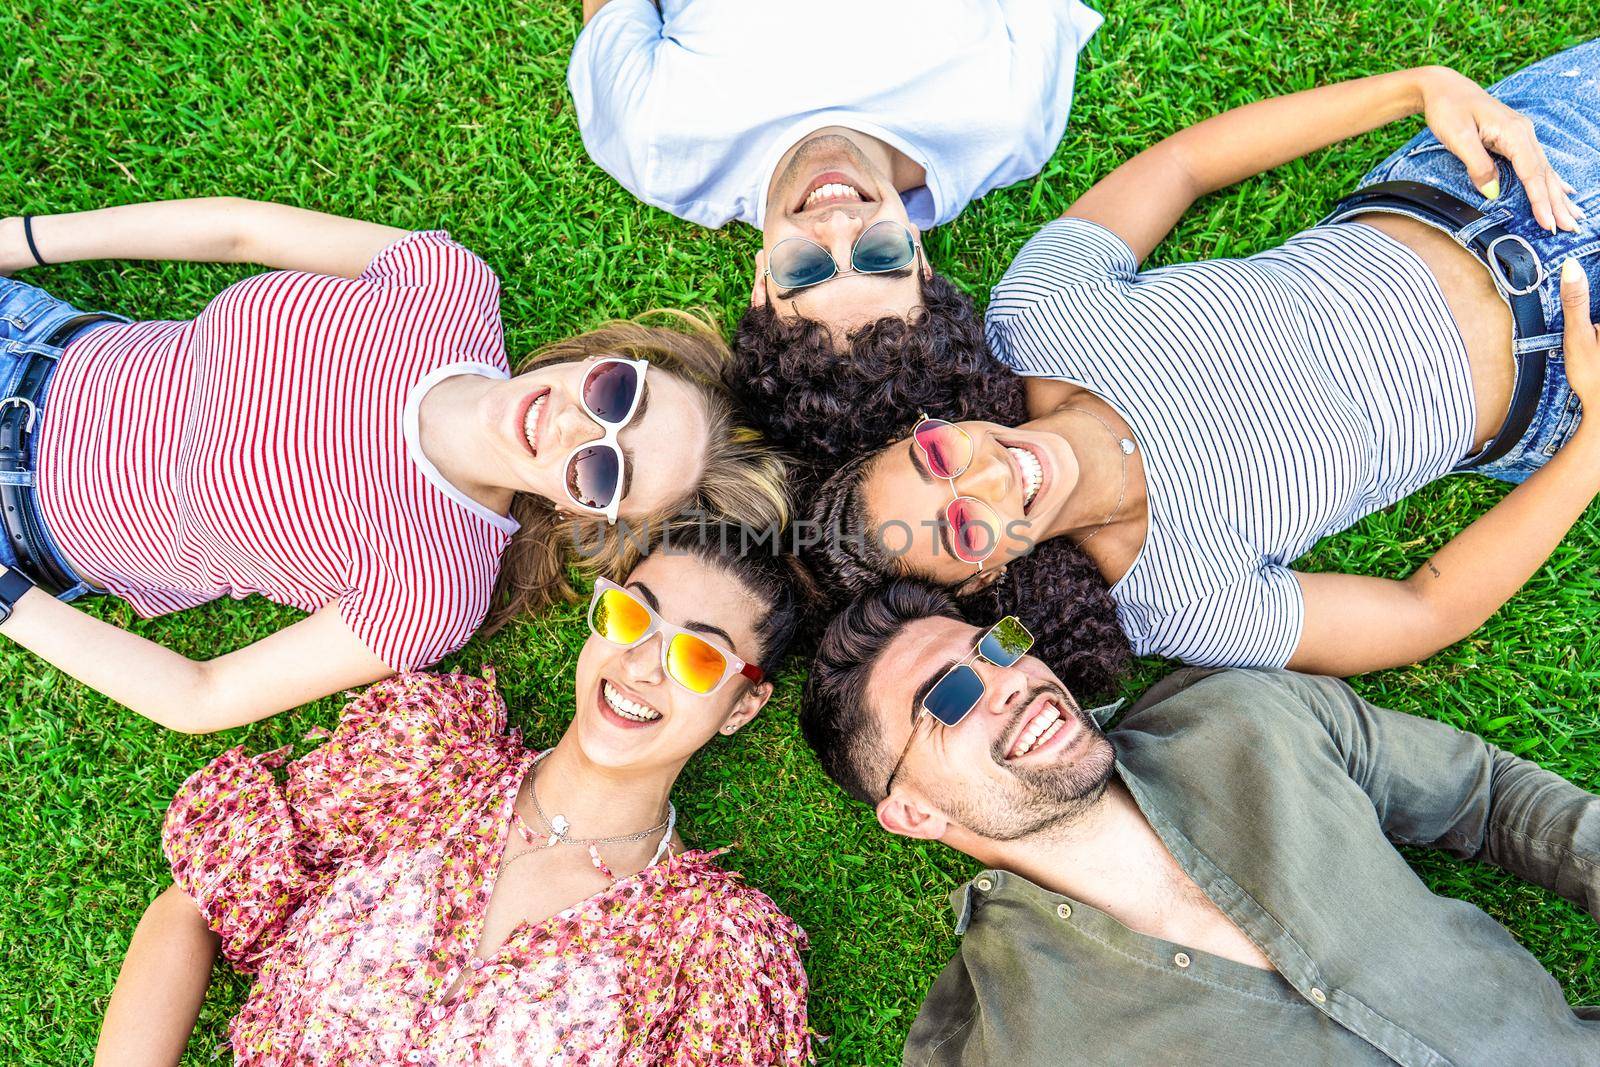 Group of friends lying on park meadow wearing colored trendy sunglasses looking at camera laughing. Happy diverse international people enjoying friendship in nature resting in circle. Mixed race union